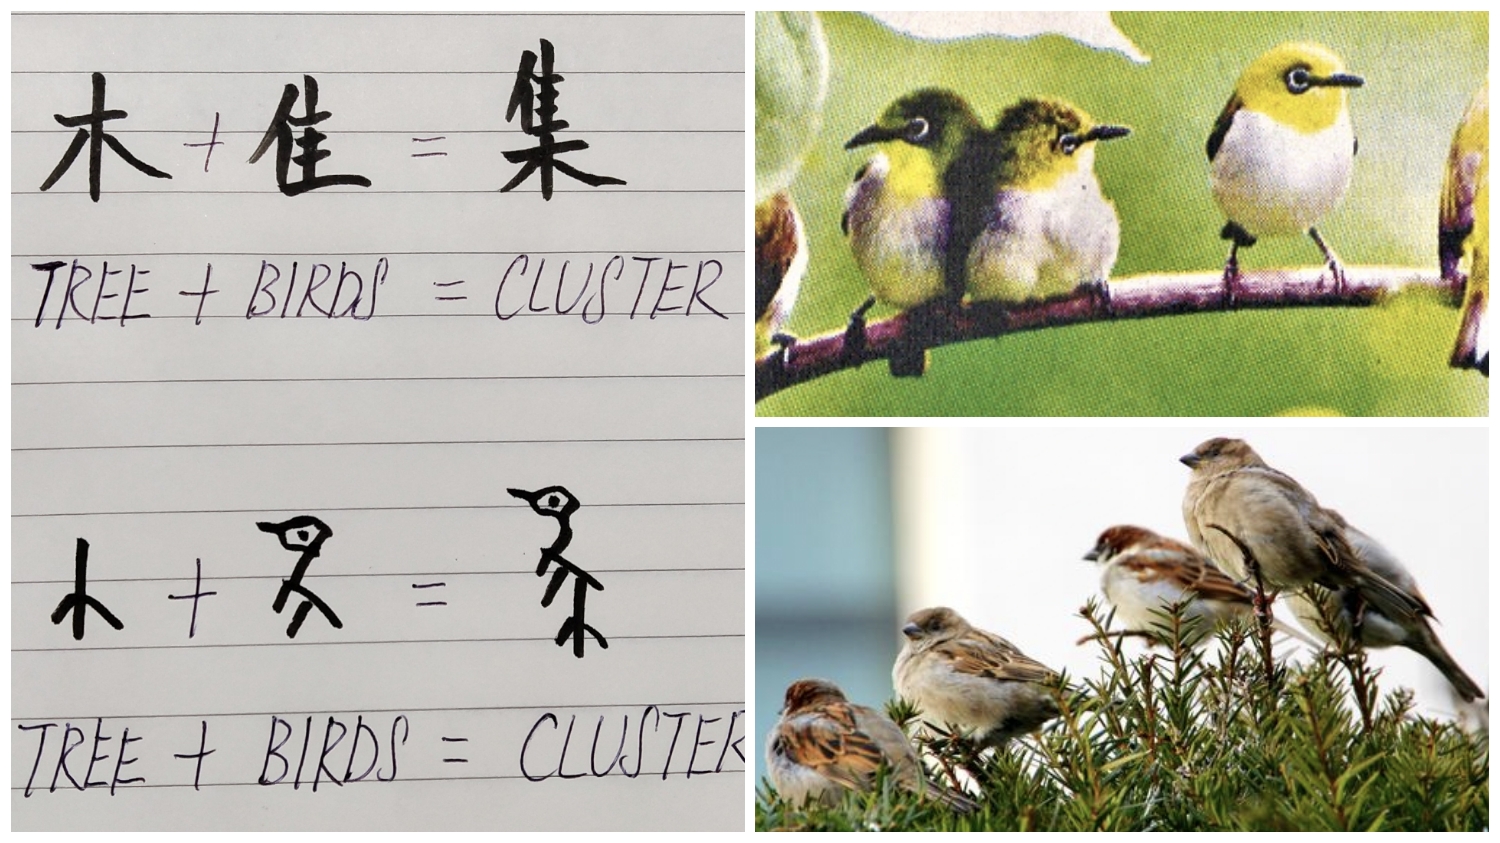 Chinese character Cluster has an origin, a drawing showing cute birds flocking on a tree